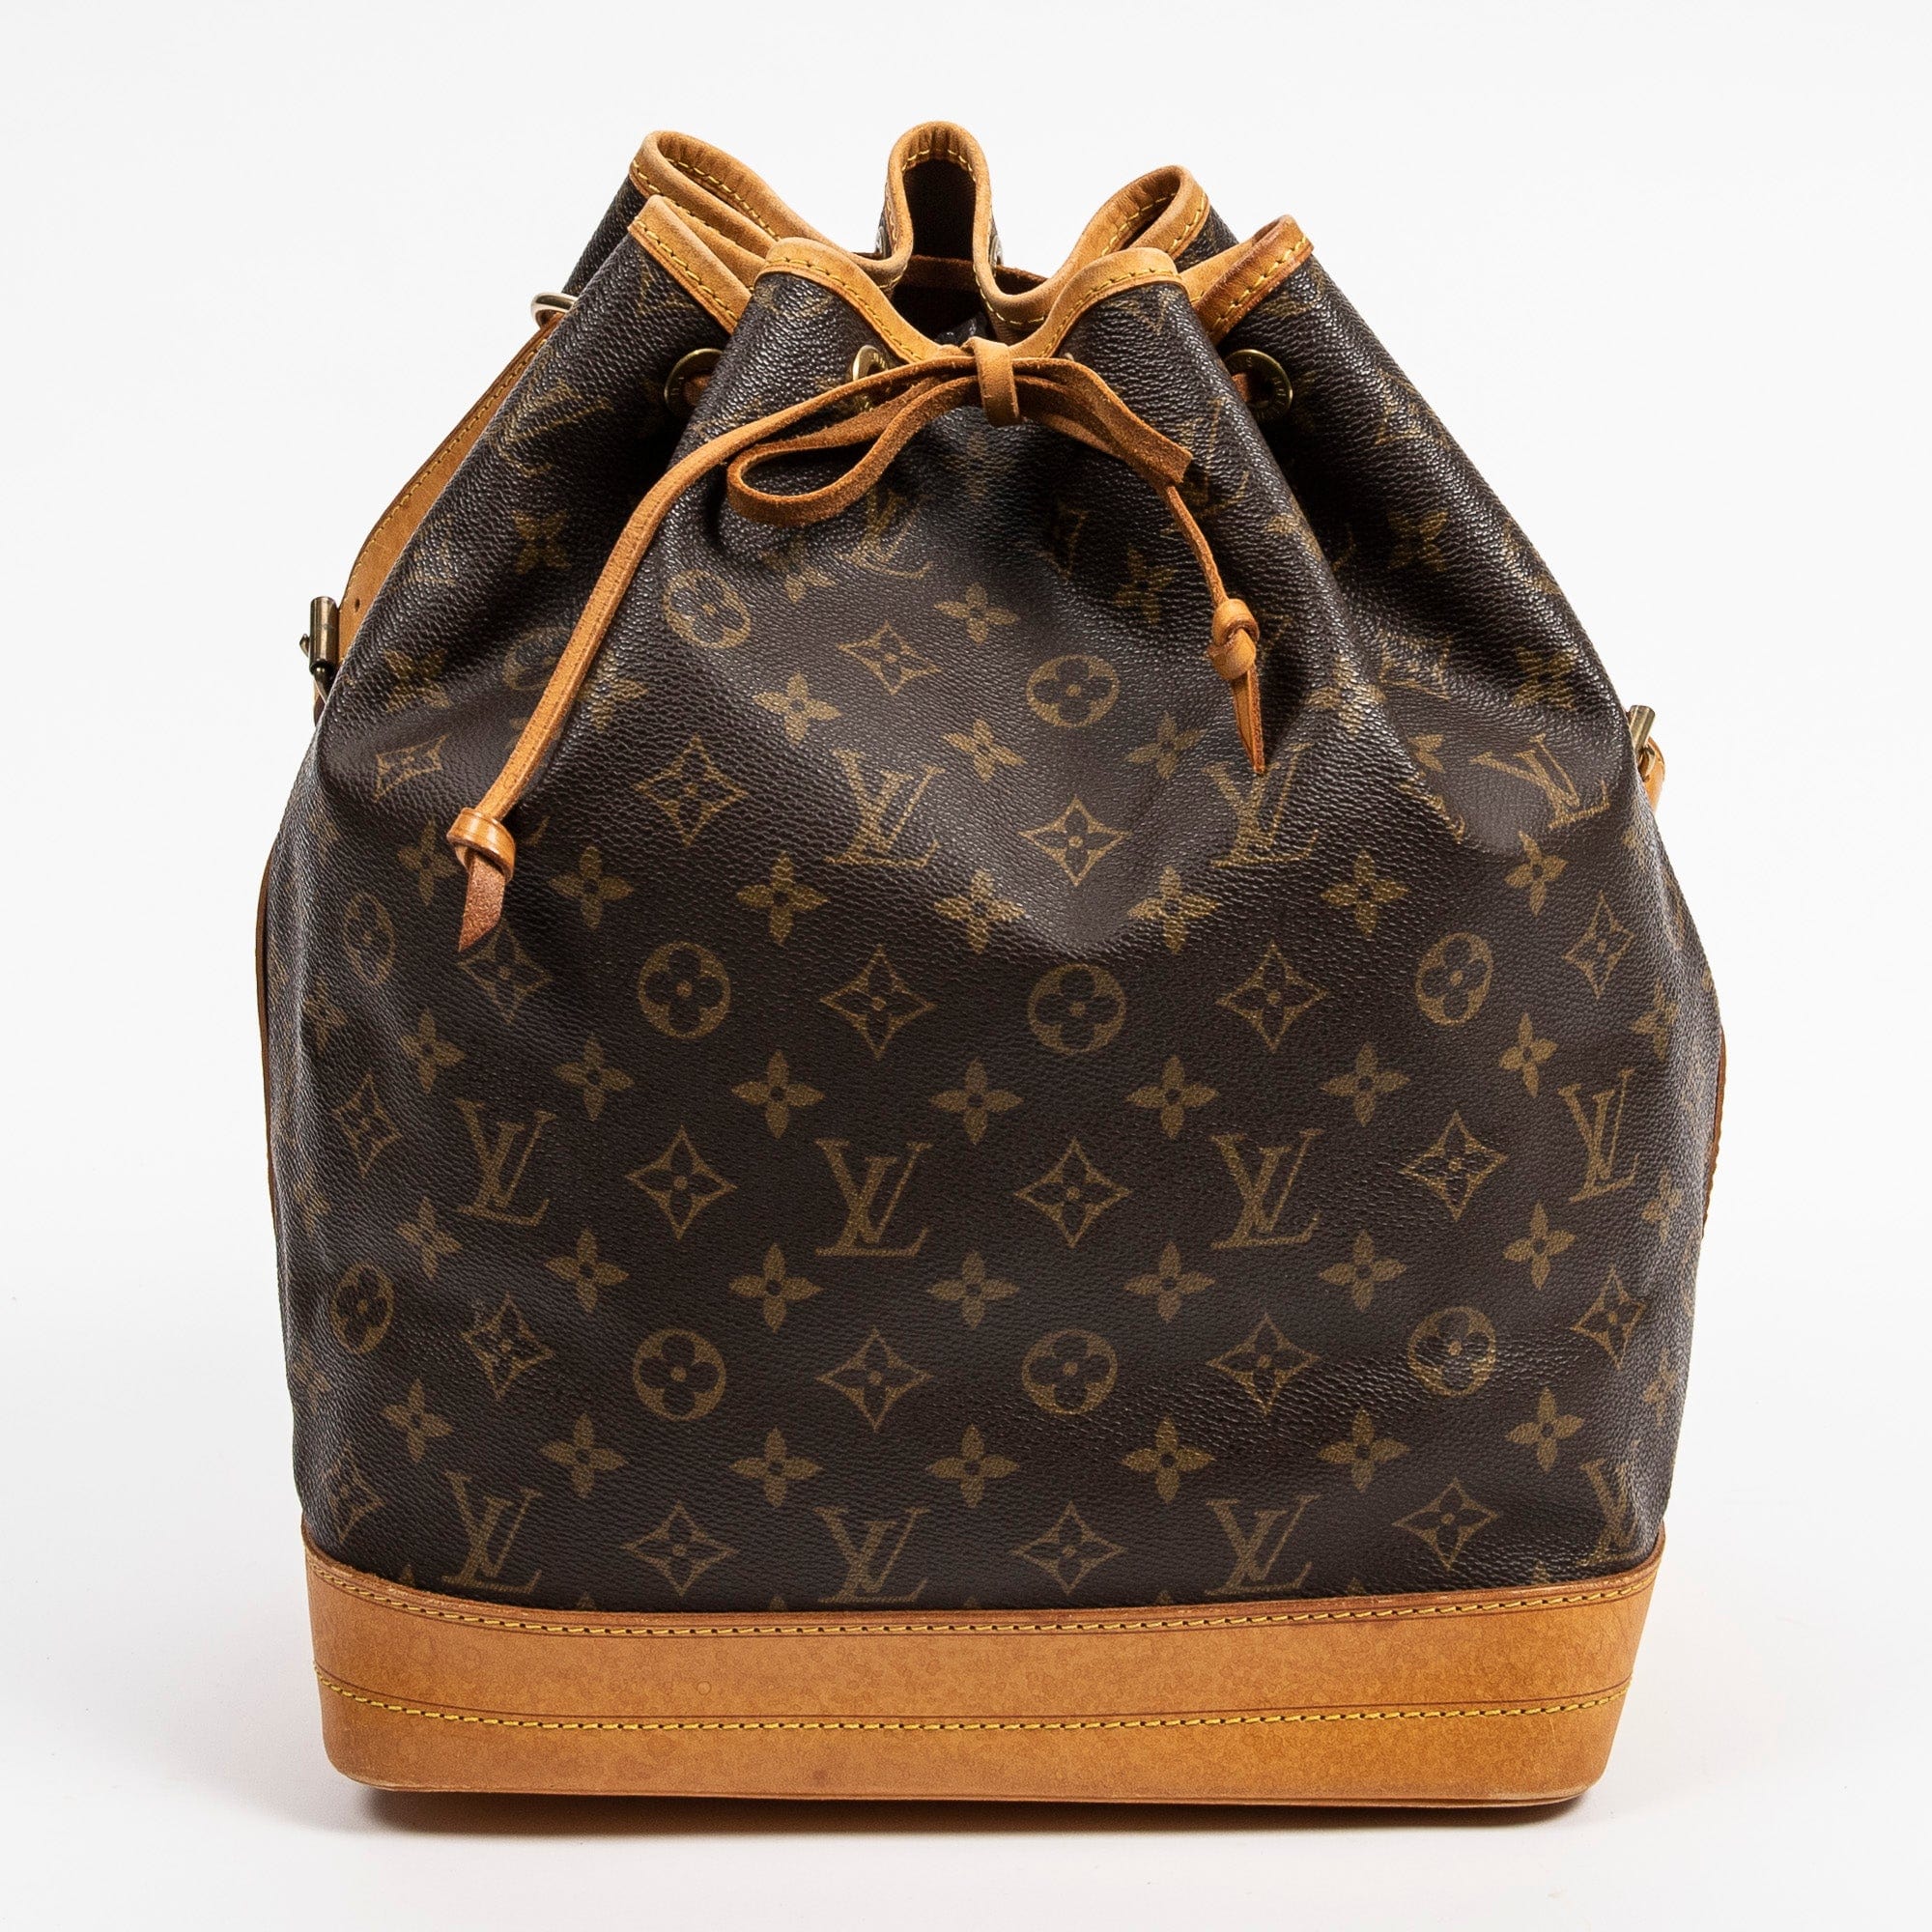 LABELLOV - Louis vuitton is known for having the most